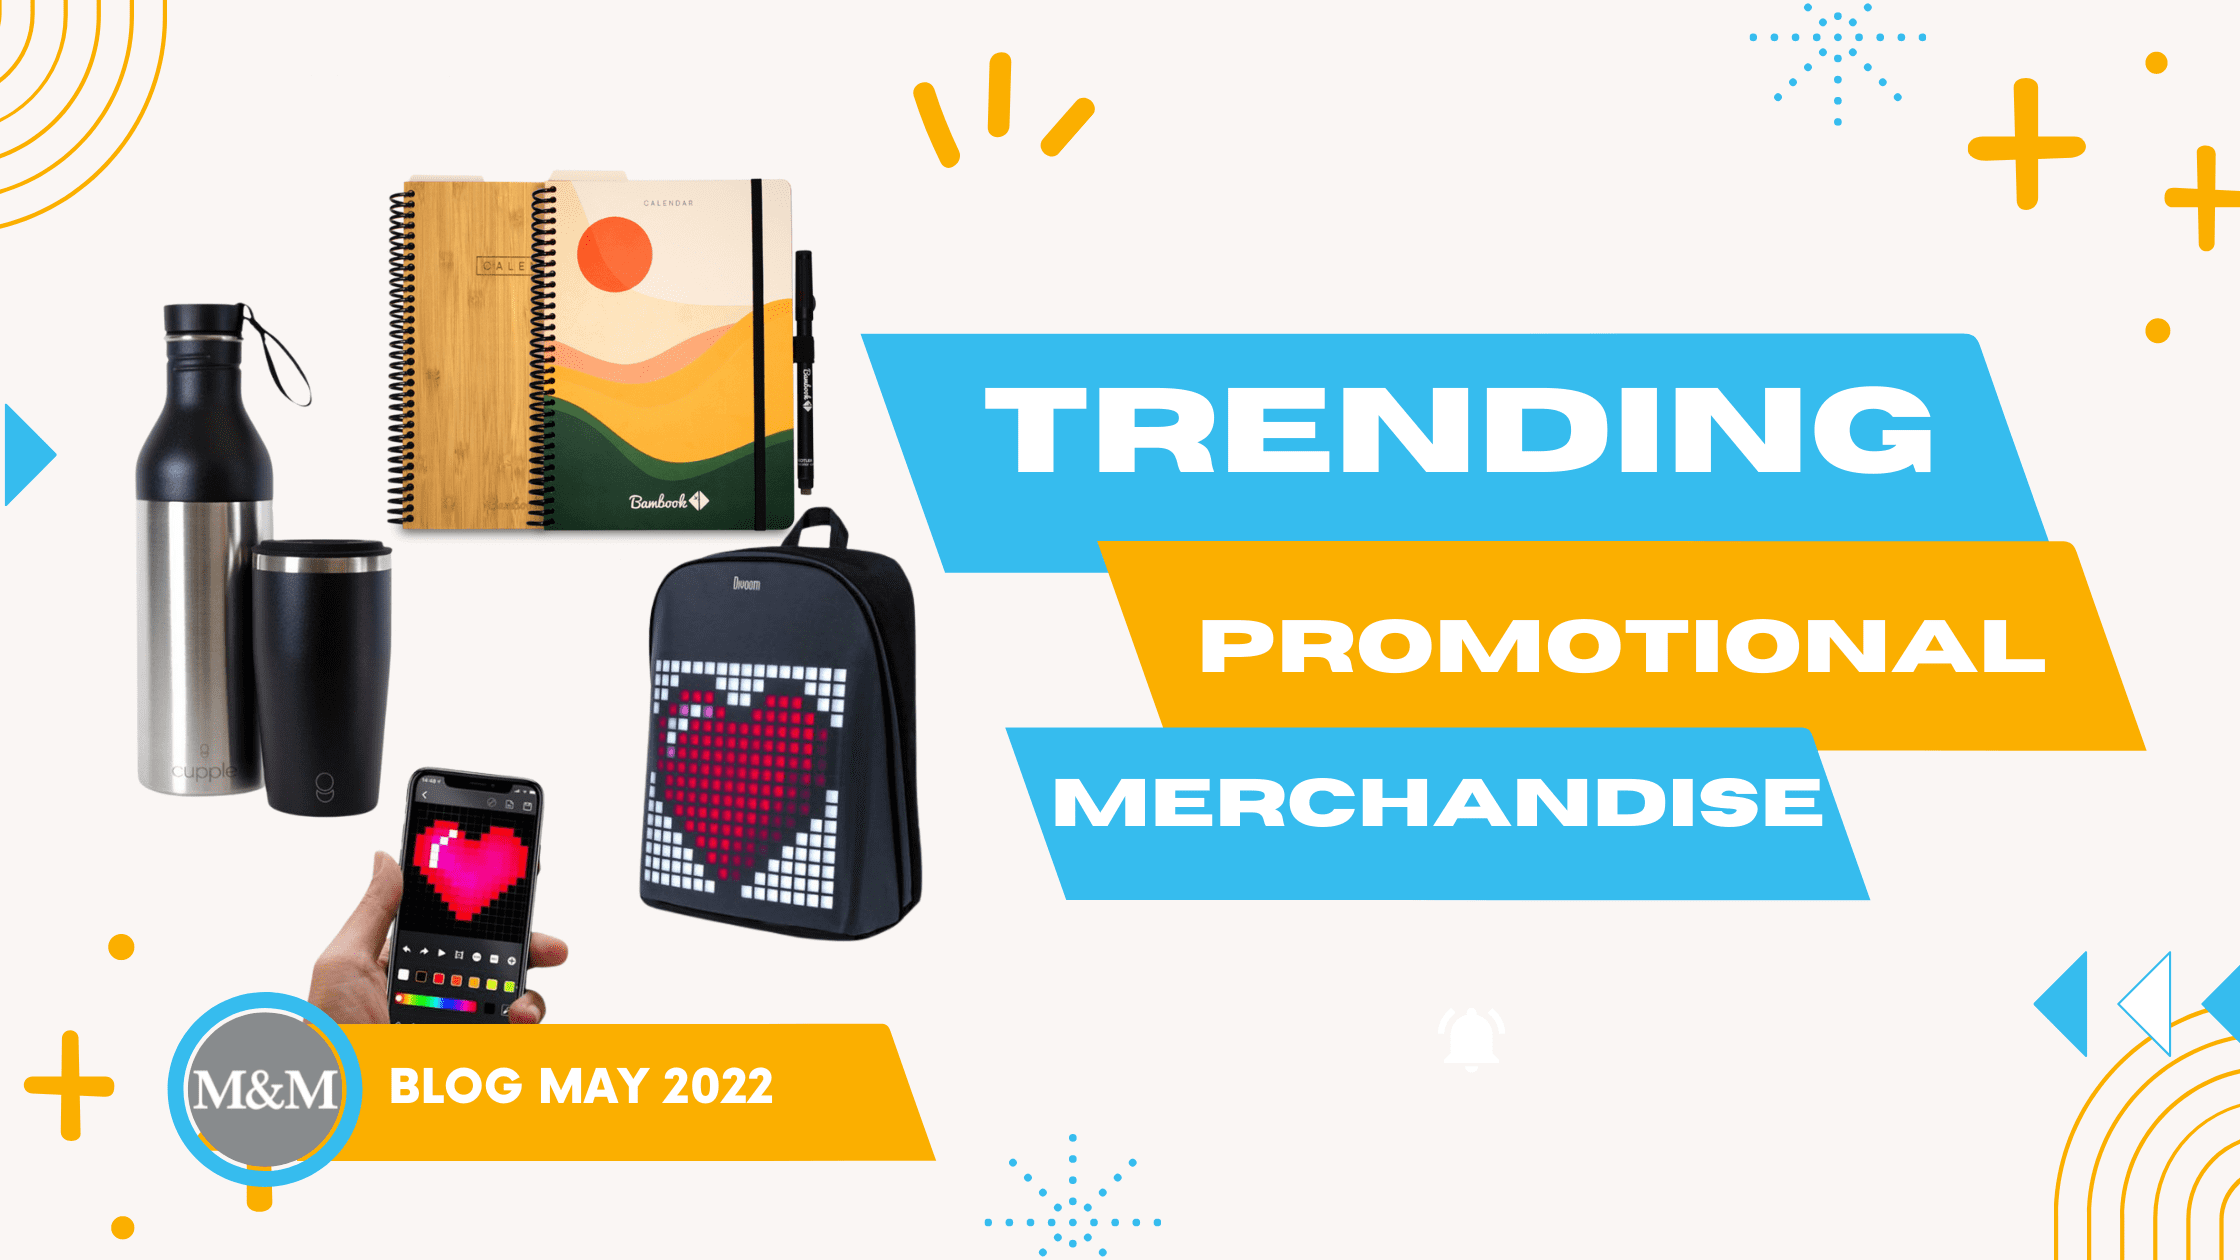 Top promotional products and branded merchandise trends for 2022